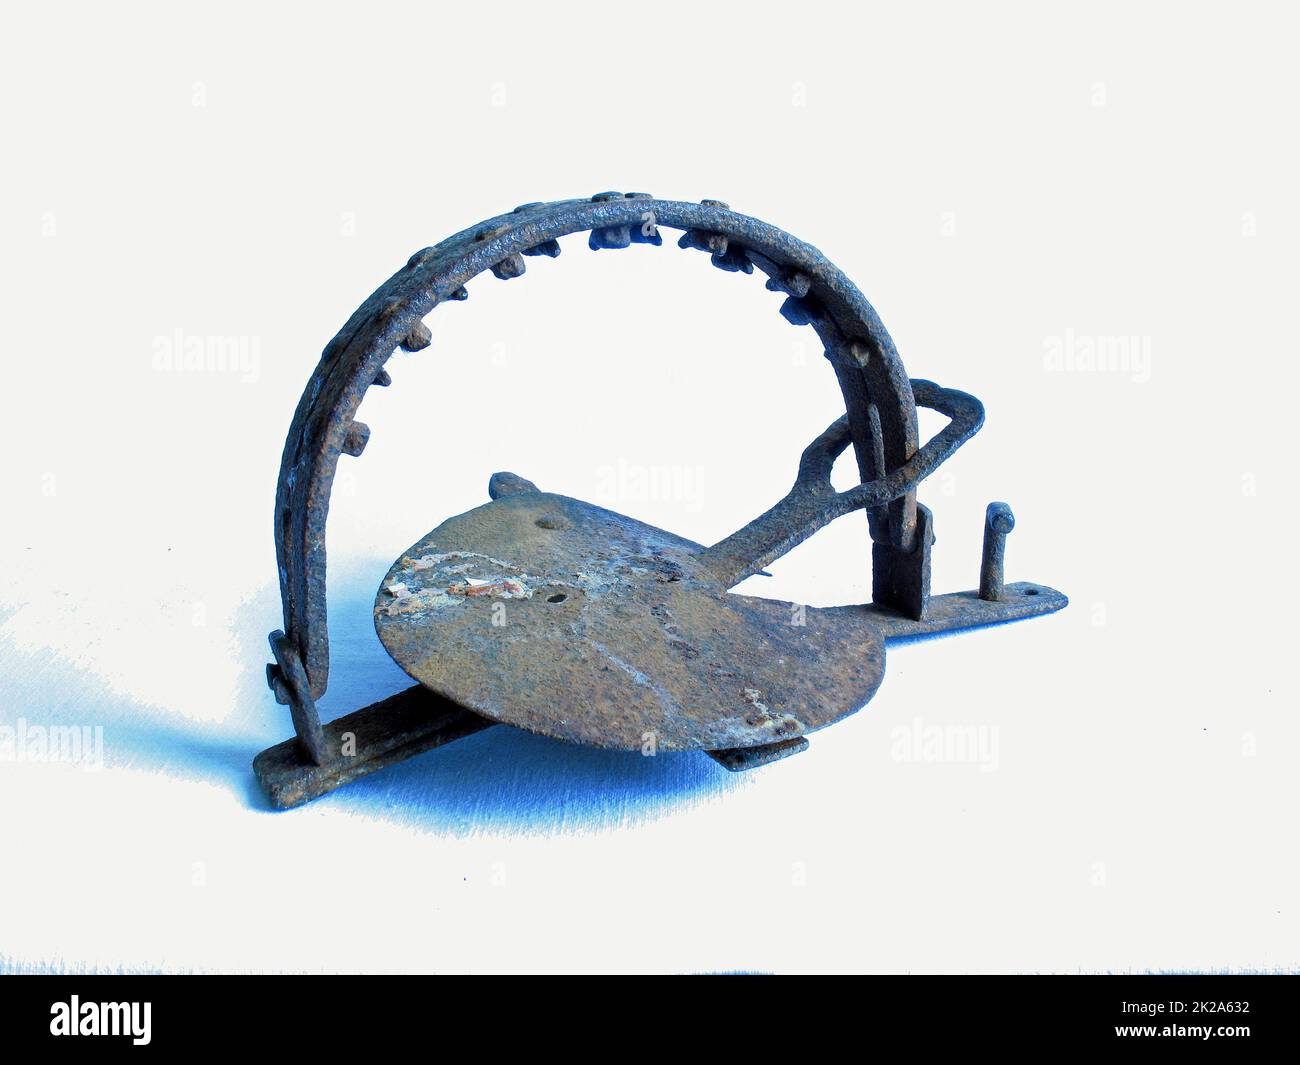 A Metal Animal Trap That Is Open Attached To The Ground With A Metal Chain  On An Isolated Background Stock Photo, Picture and Royalty Free Image.  Image 22348021.